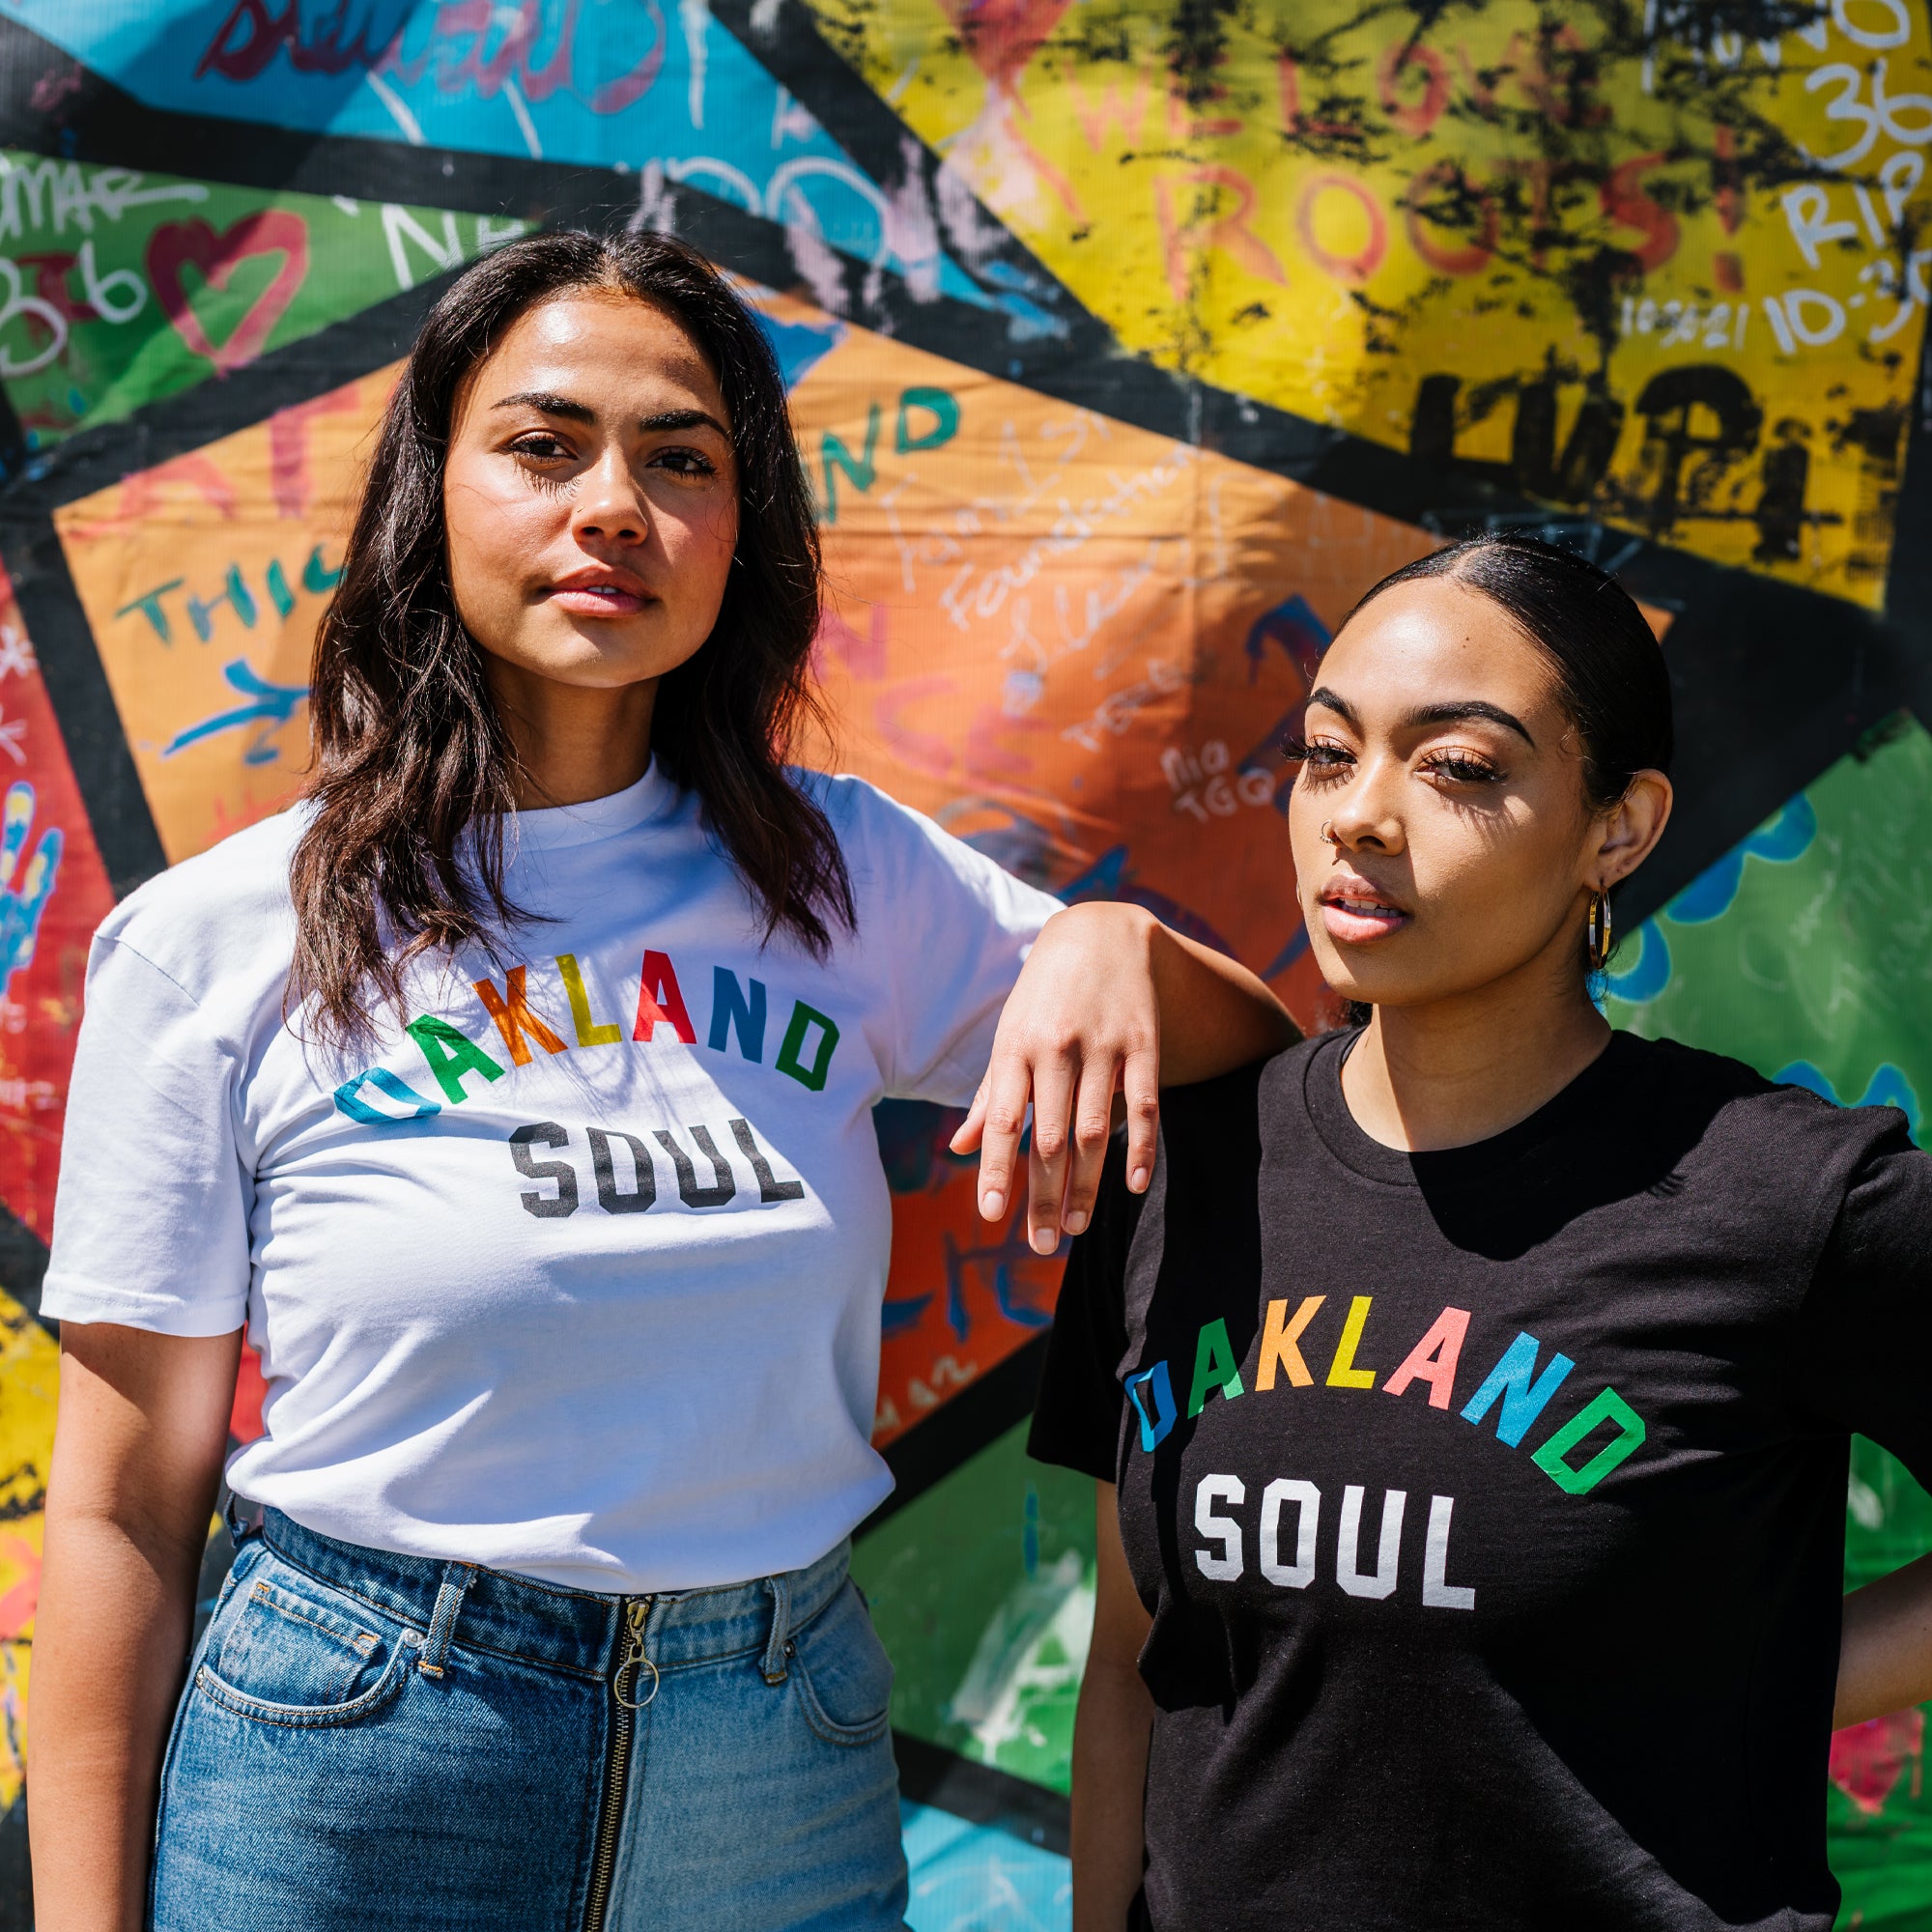 Two woman standing, with an arm resting on the other’s shoulder & graffiti background. Both wearing Oakland Soul Wordmark T-Shirts.